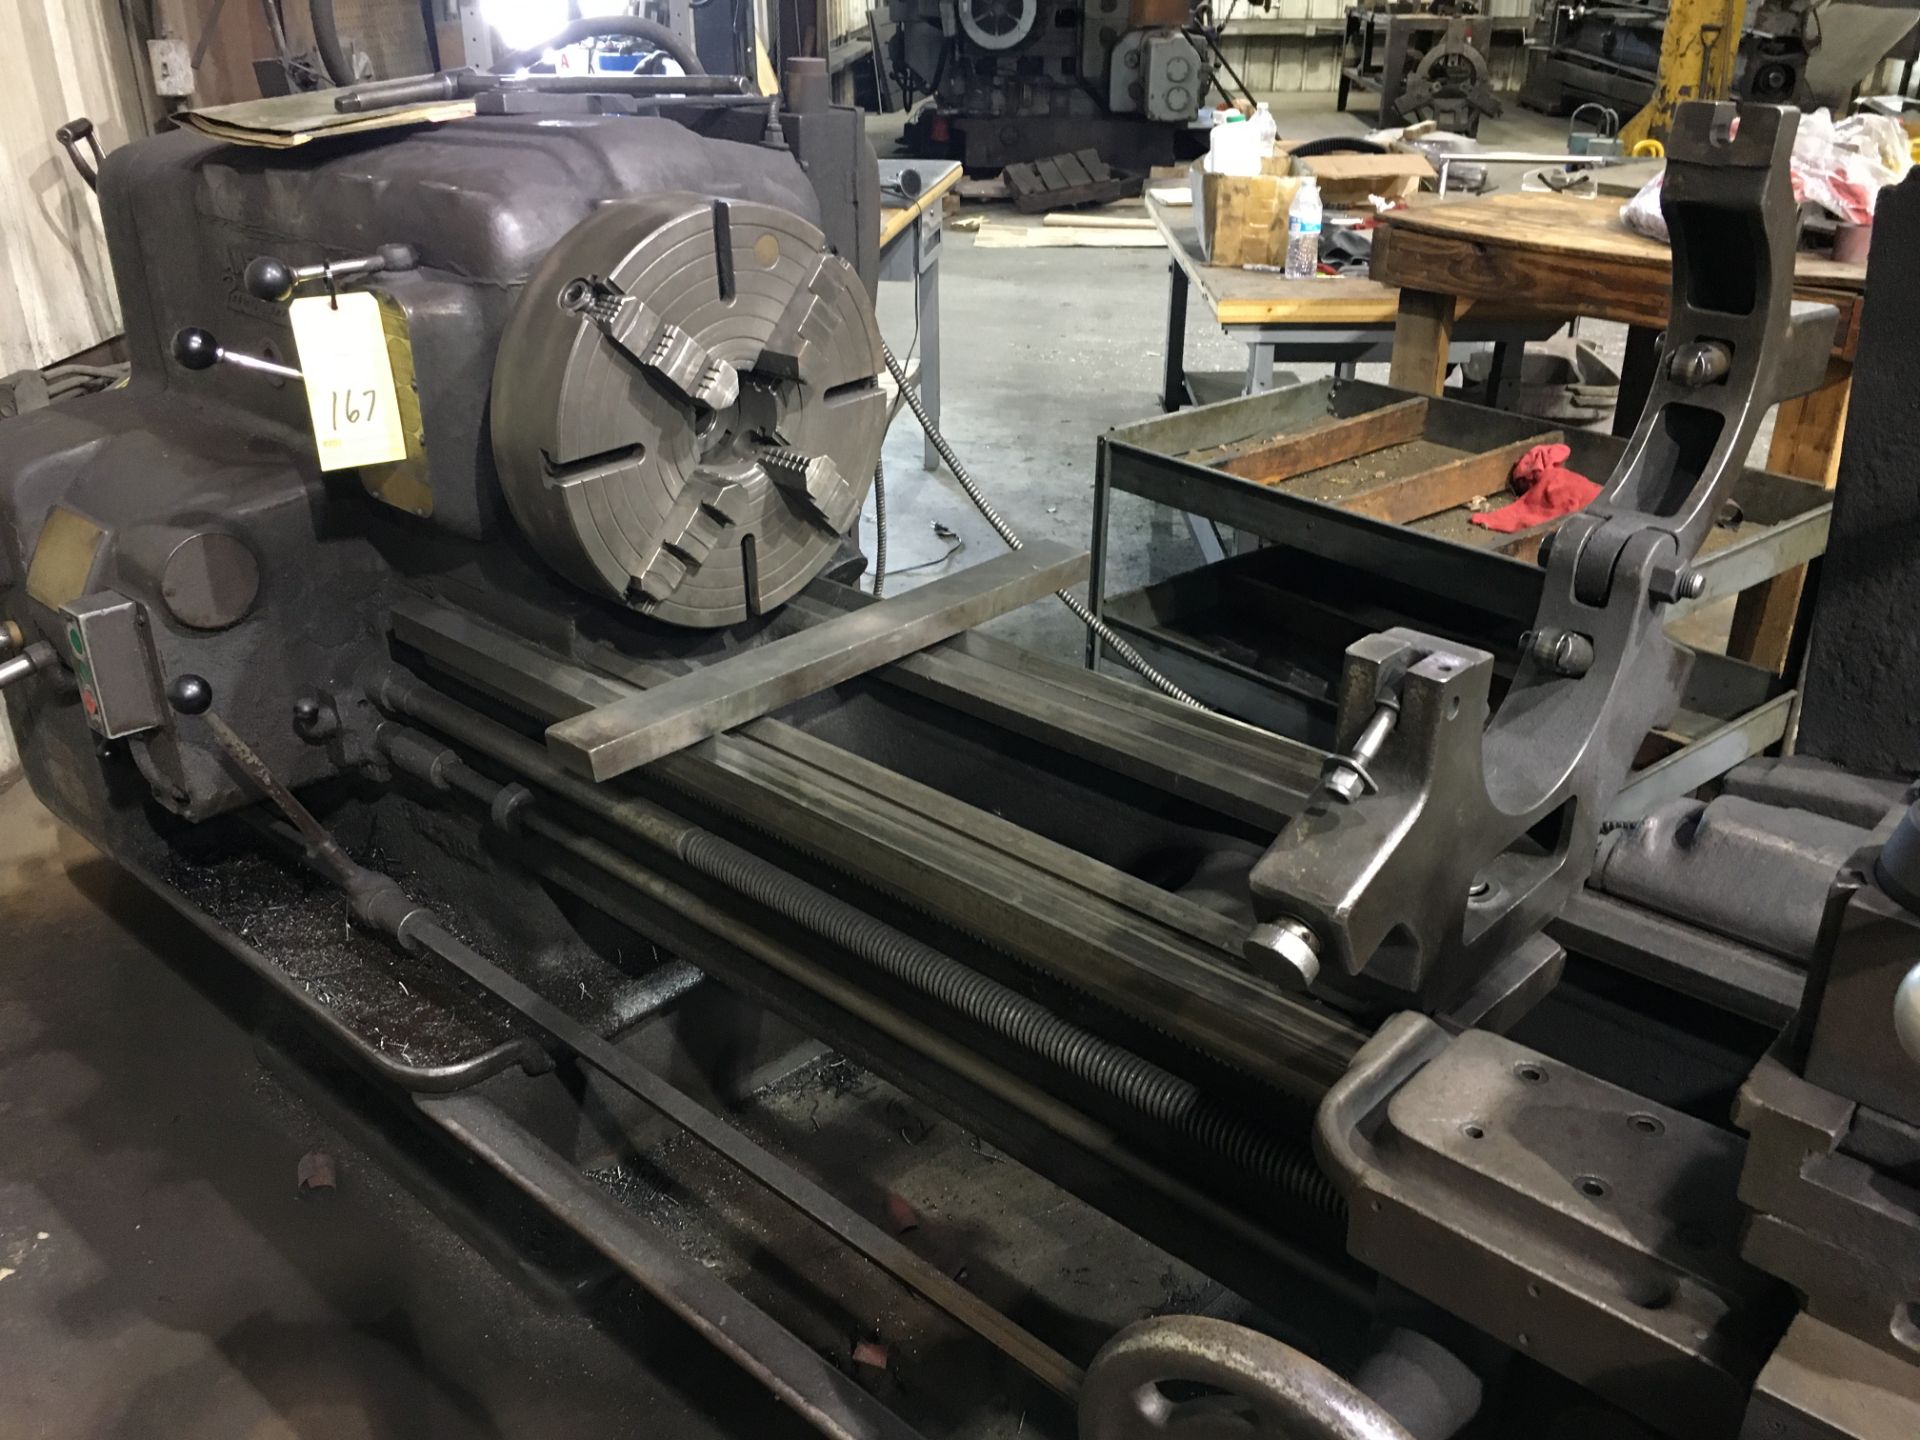 ENGINE LATHE, AMERICAN PACEMAKER 16" X 102", taper attach., 15" dia. 4-jaw chuck, (2) steadyrests, - Image 2 of 5